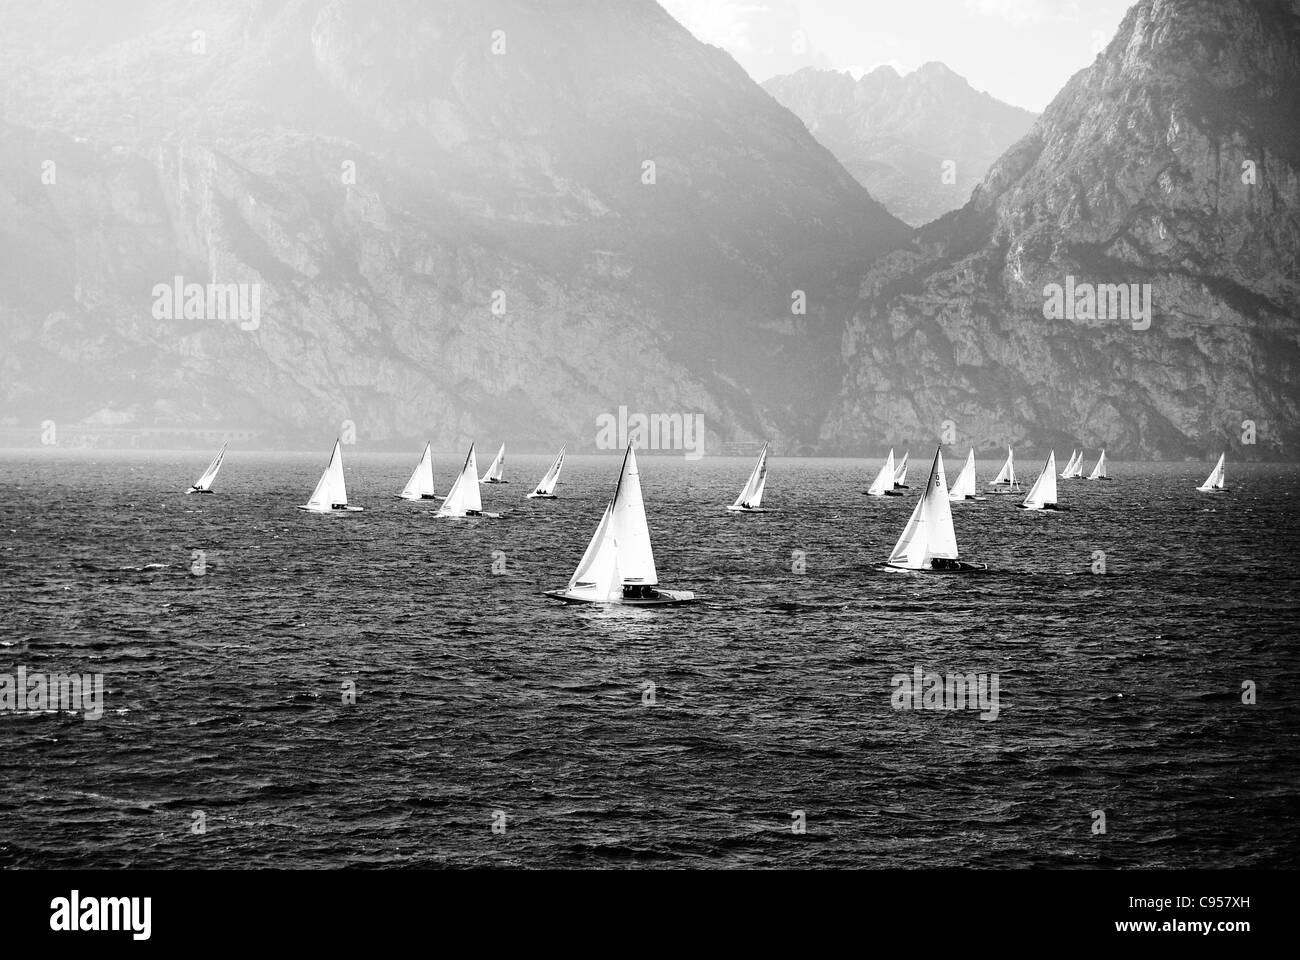 The sailing yachts compete in speed Stock Photo